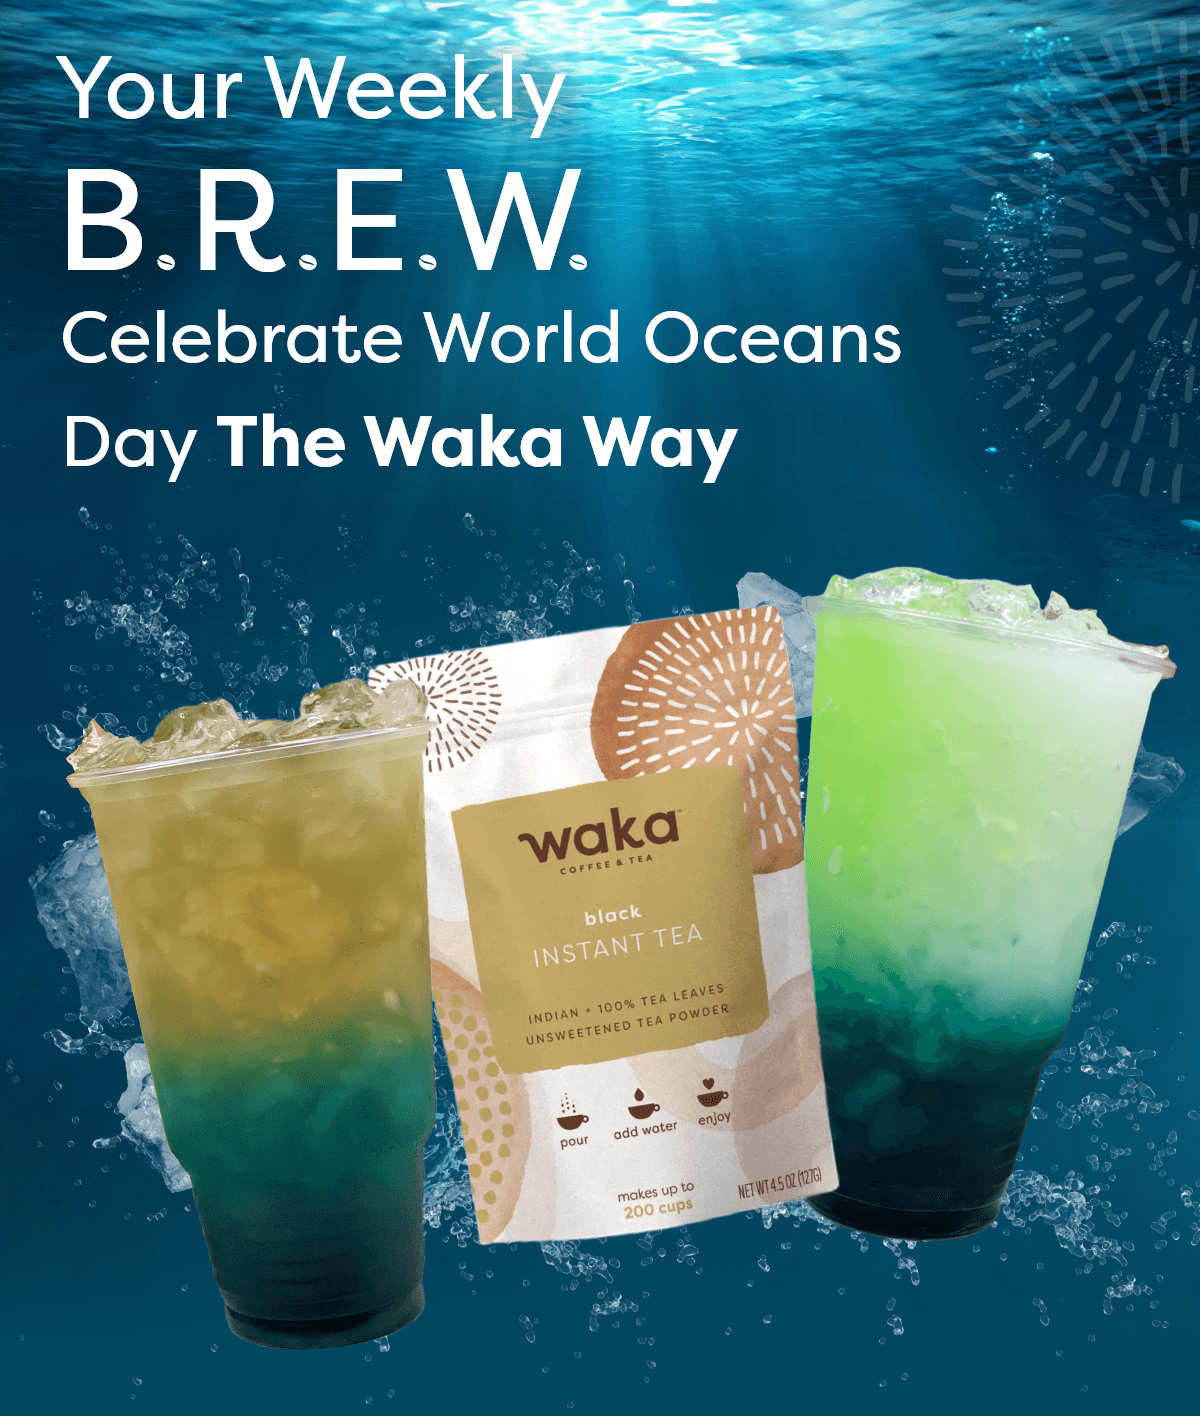 Your Weekly B.R.E.W. Celebrate World Oceans Day The Waka Way